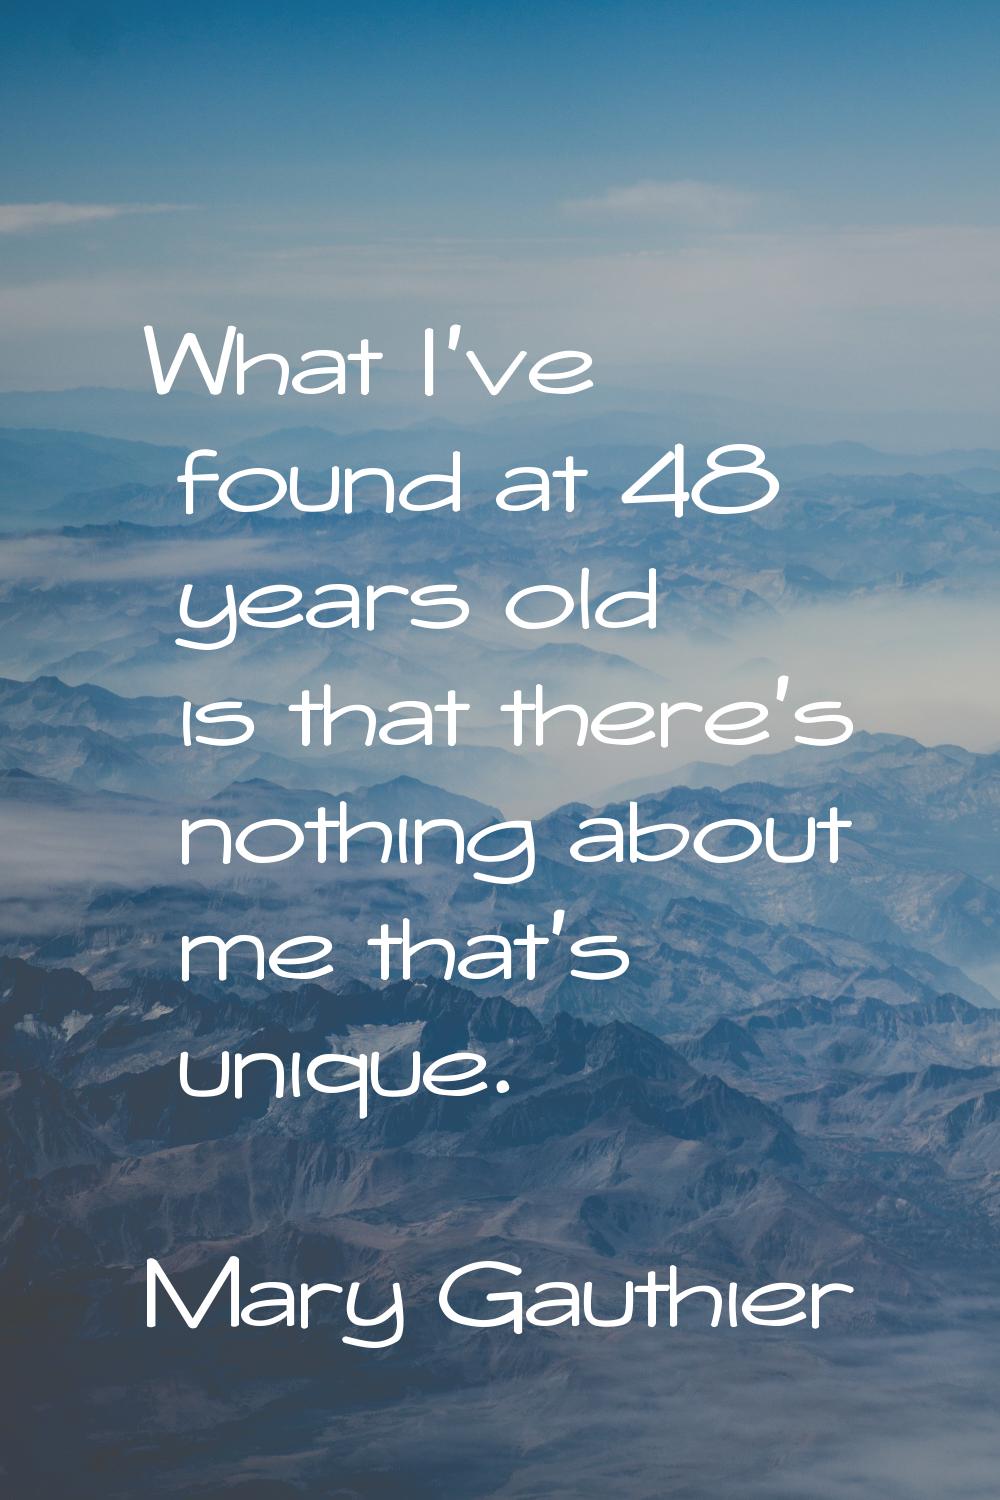 What I've found at 48 years old is that there's nothing about me that's unique.